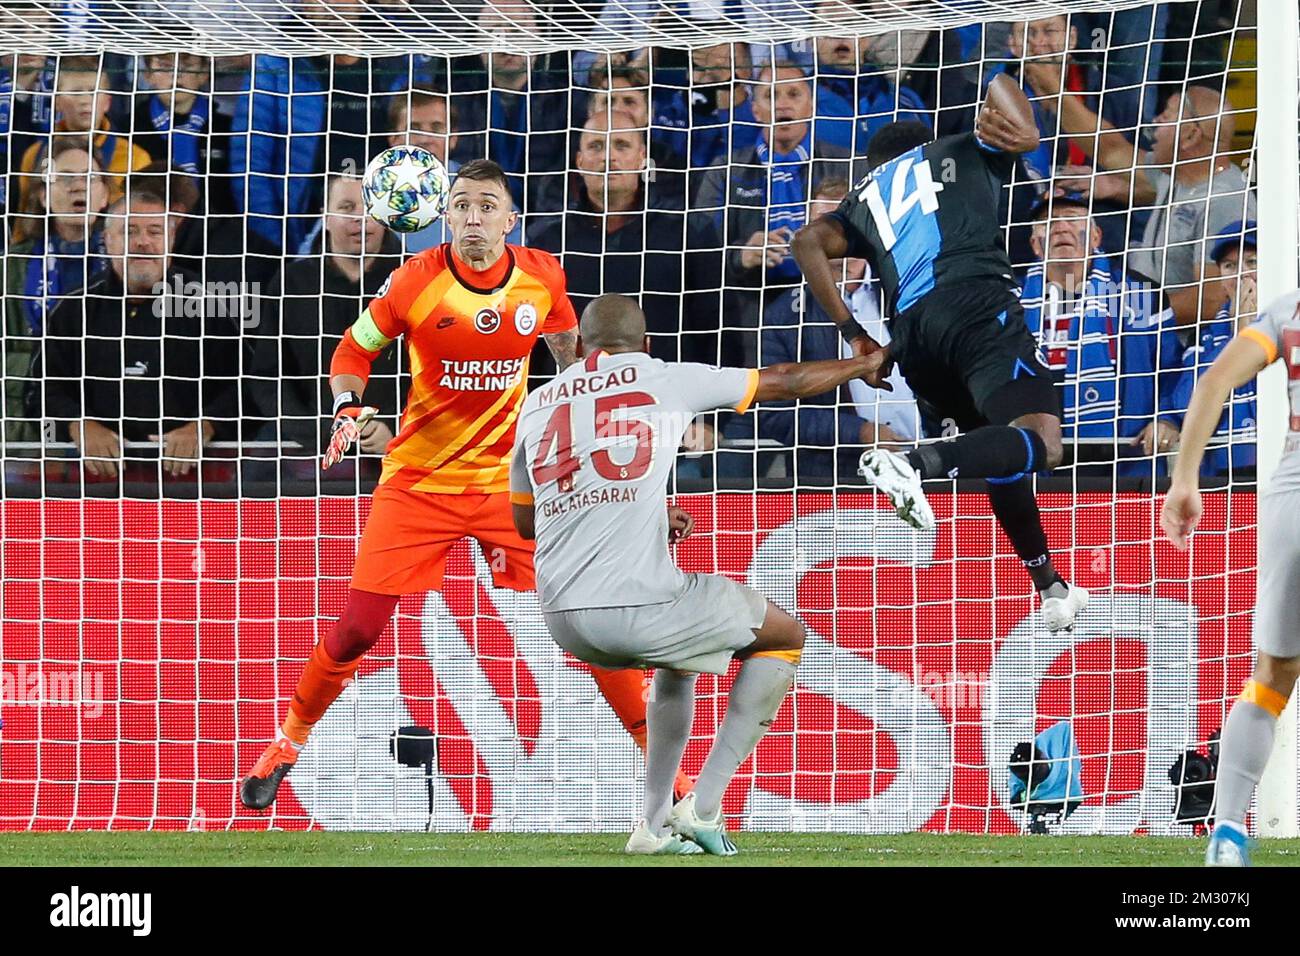 Galatasaray's Fernando Muslera, Galatasaray's Marcos do Nascimento Teixeira and Club's David Okereke fight for the ball during a game between Belgian soccer team Club Brugge and Turkish club Galatasaray AS, in Brugge, Wednesday 18 September 2019, on the first day of the group stage of the UEFA Champions League, in the group A. BELGA PHOTO BRUNO FAHY Stock Photo